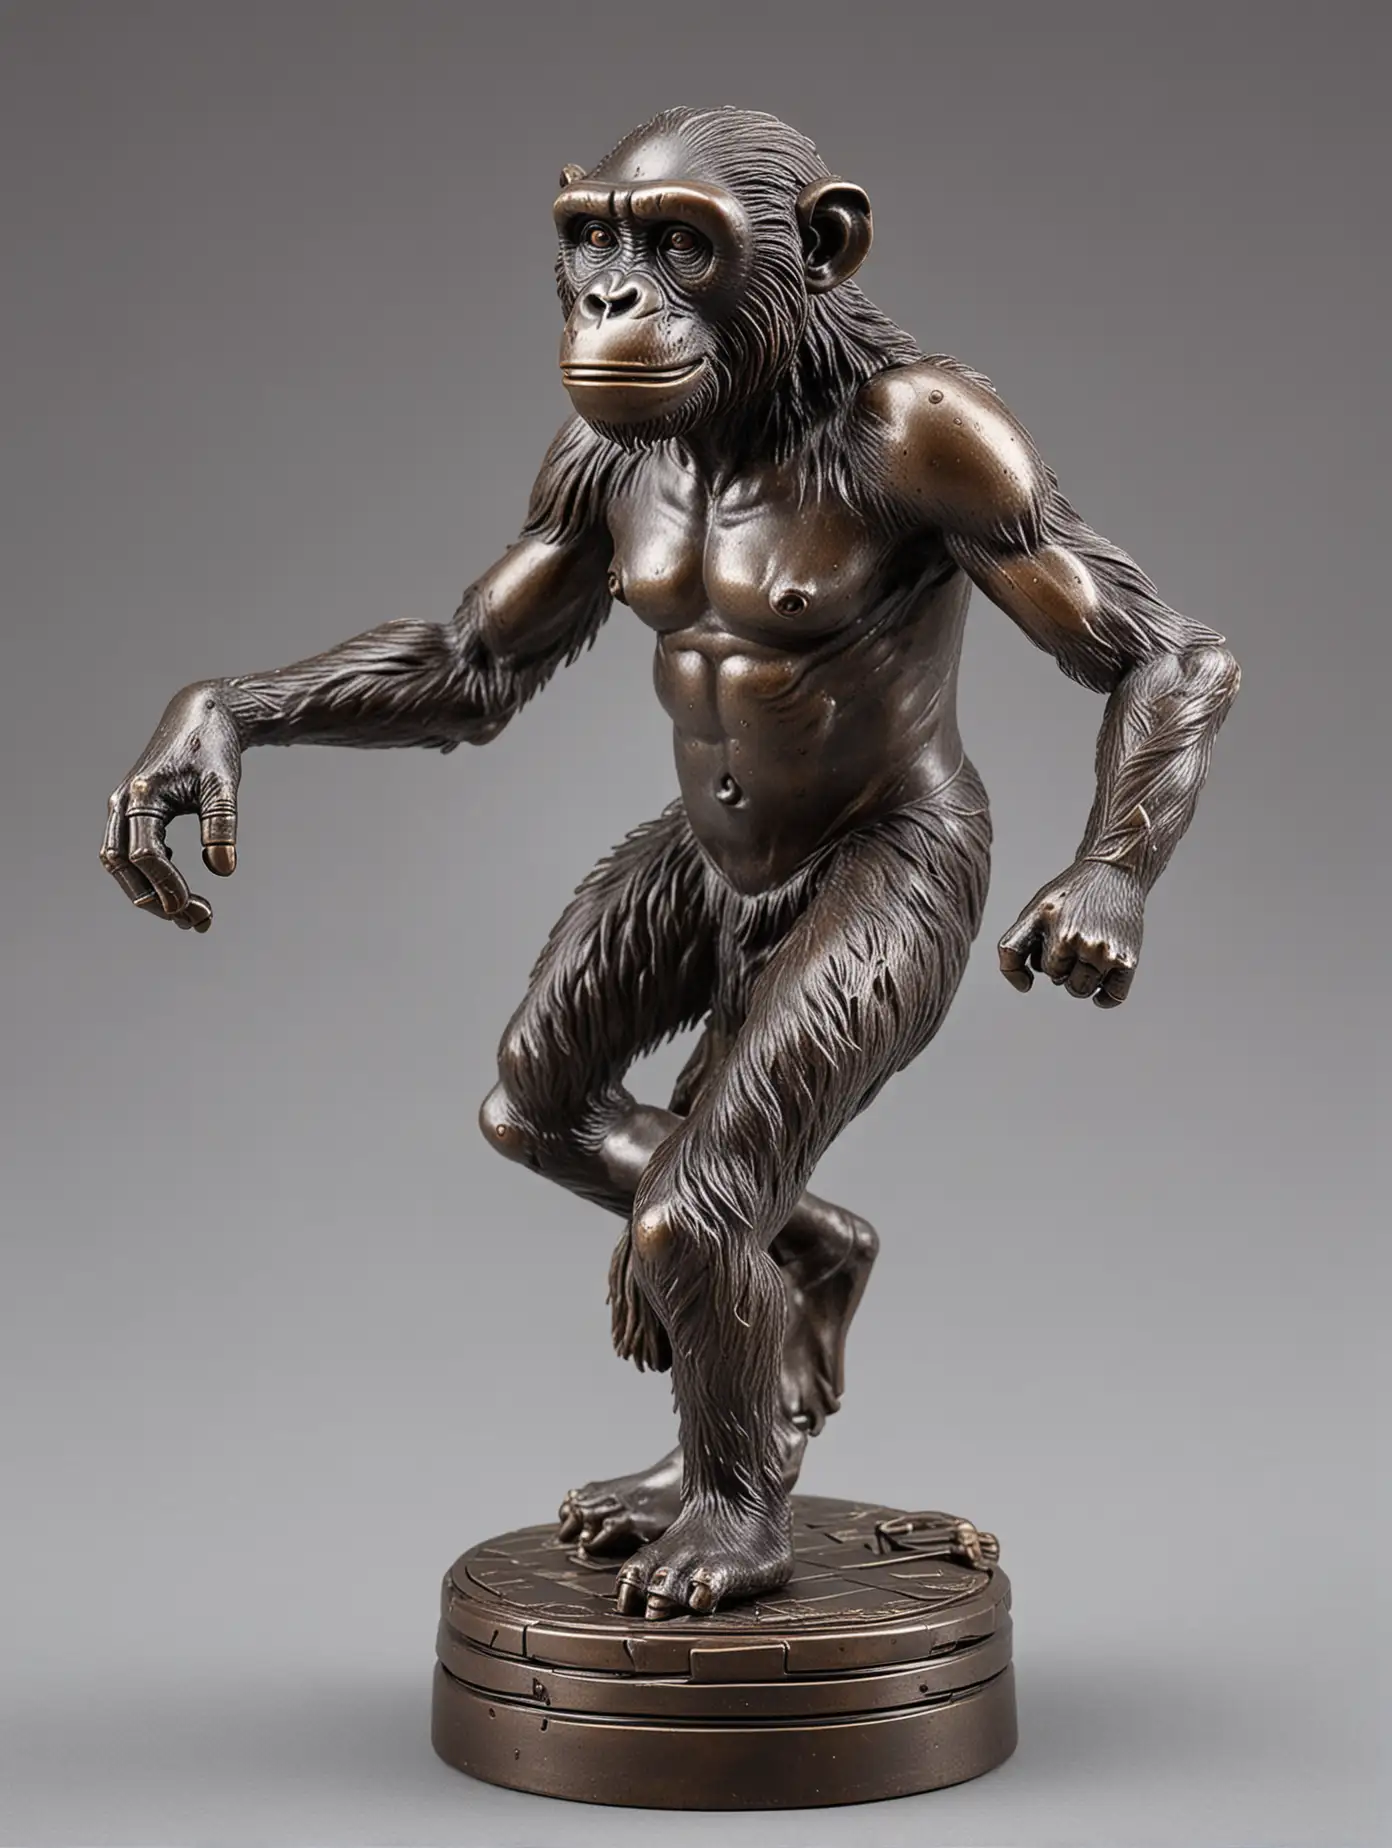 metal Chess piece in the shape of a dancing chimpanzee


